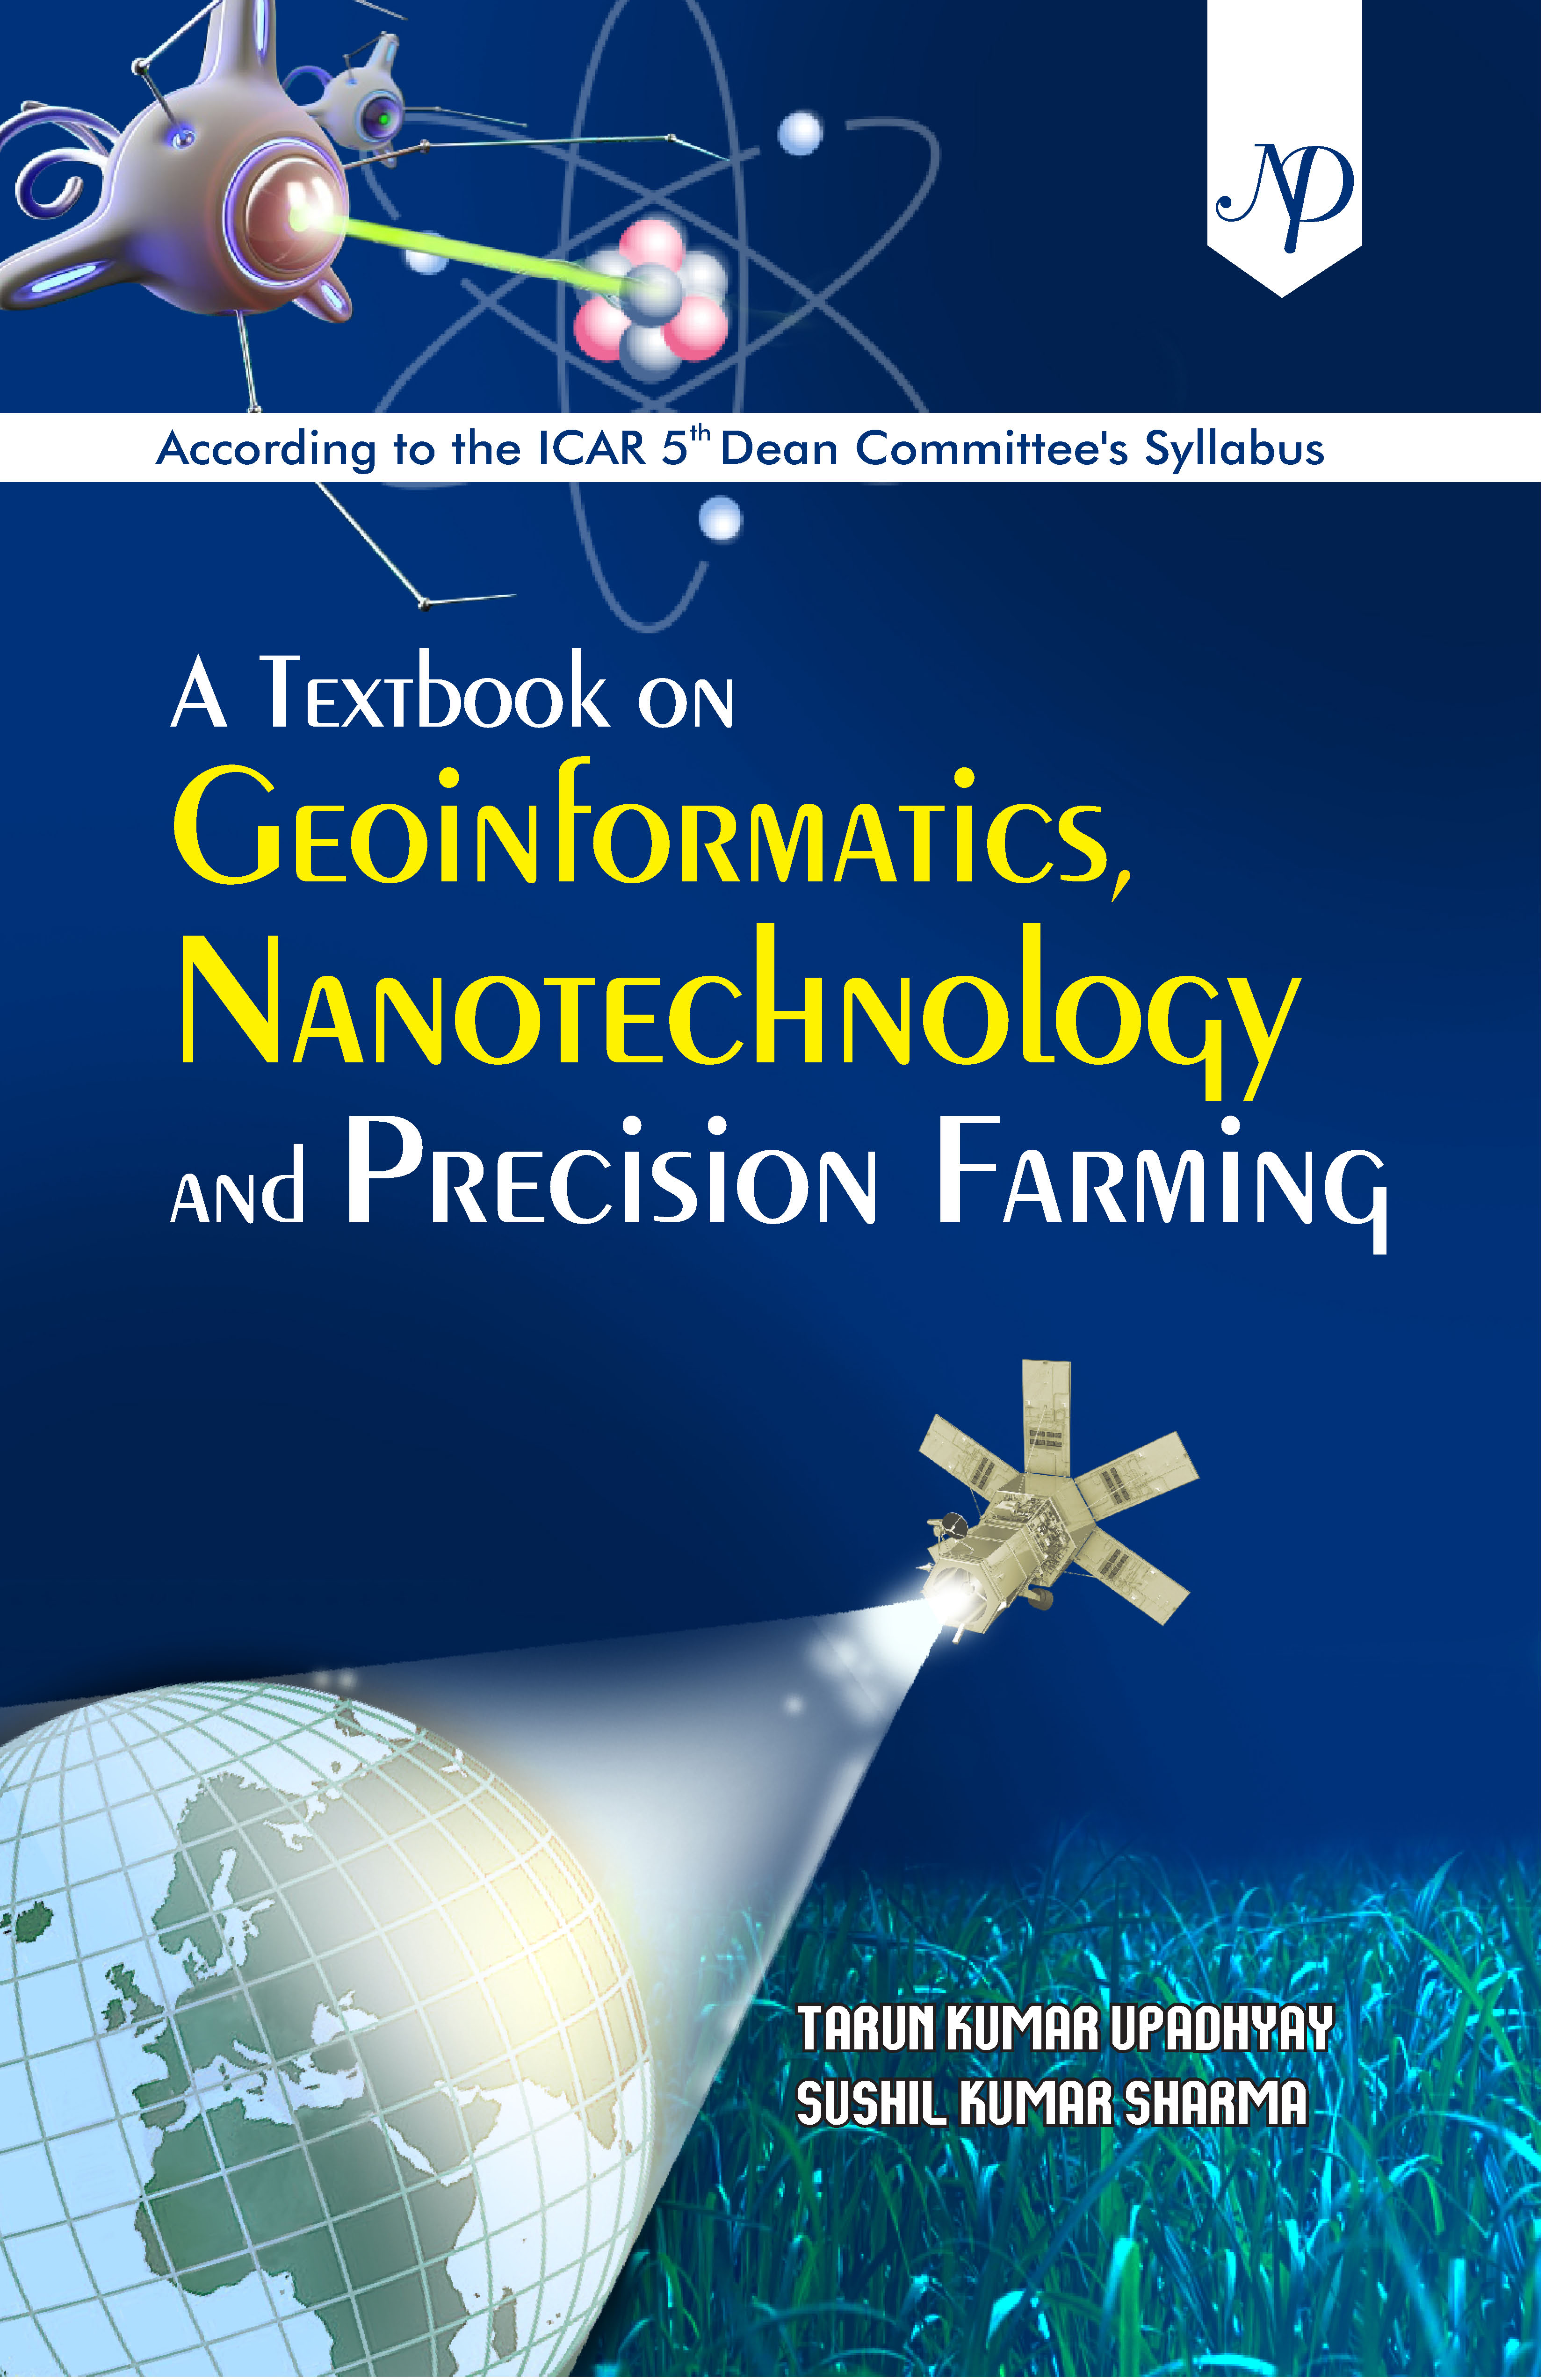 A Textbook on Geoinformatics, Nanotechnology and Precision farming.jpg